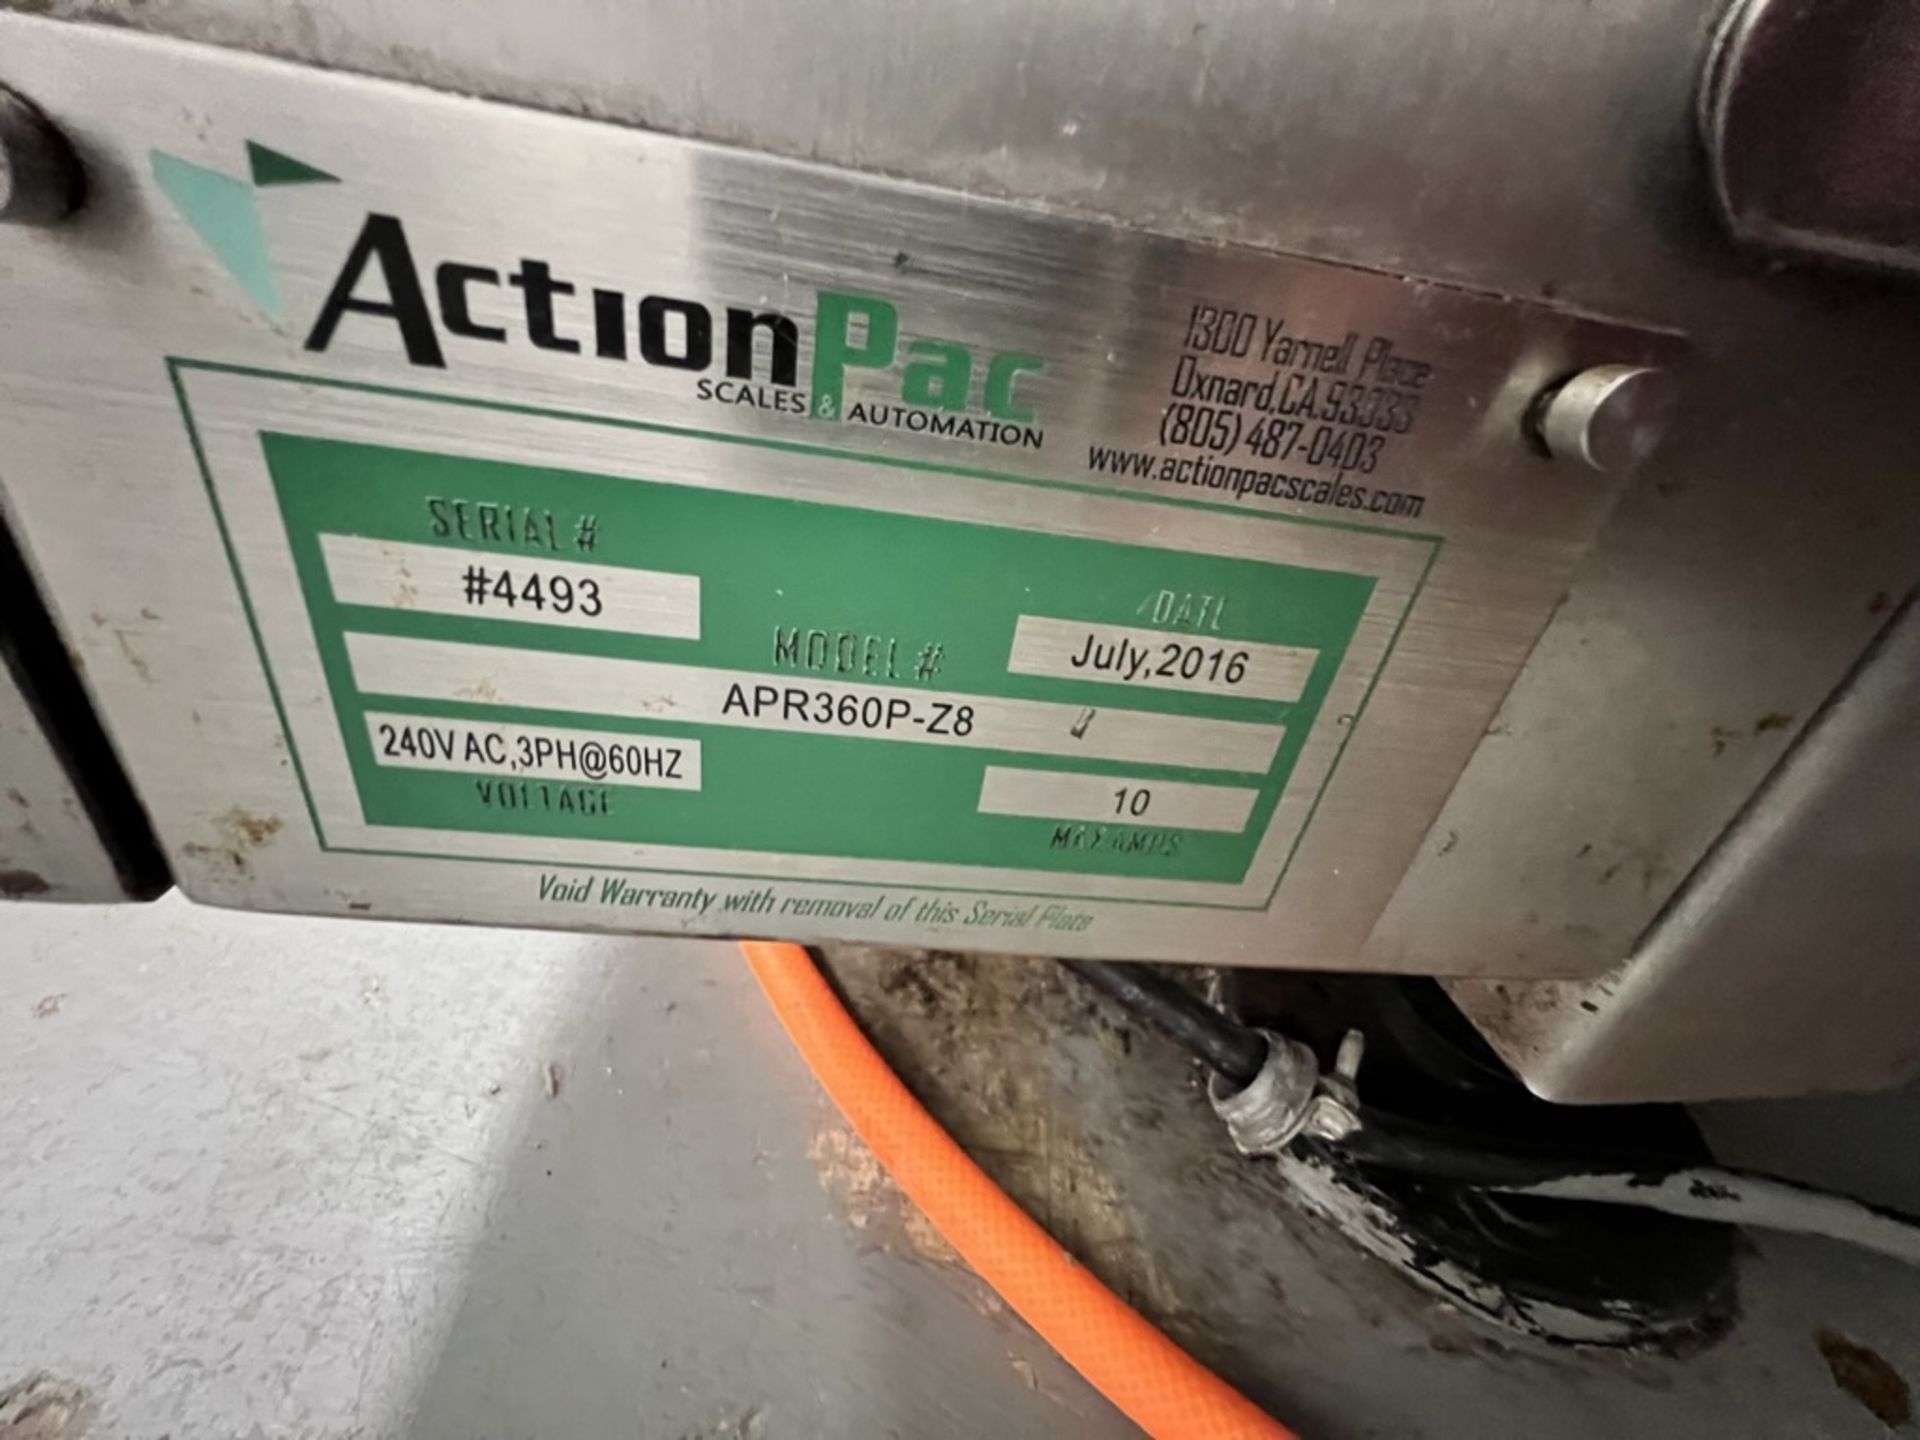 2016 ACTIONPAC PREMADE AUTO-POUCH FILLER, MODEL APR360P-Z8, S/N 4493, APPROX. 45 PPM, BAG SIZE - Image 21 of 23